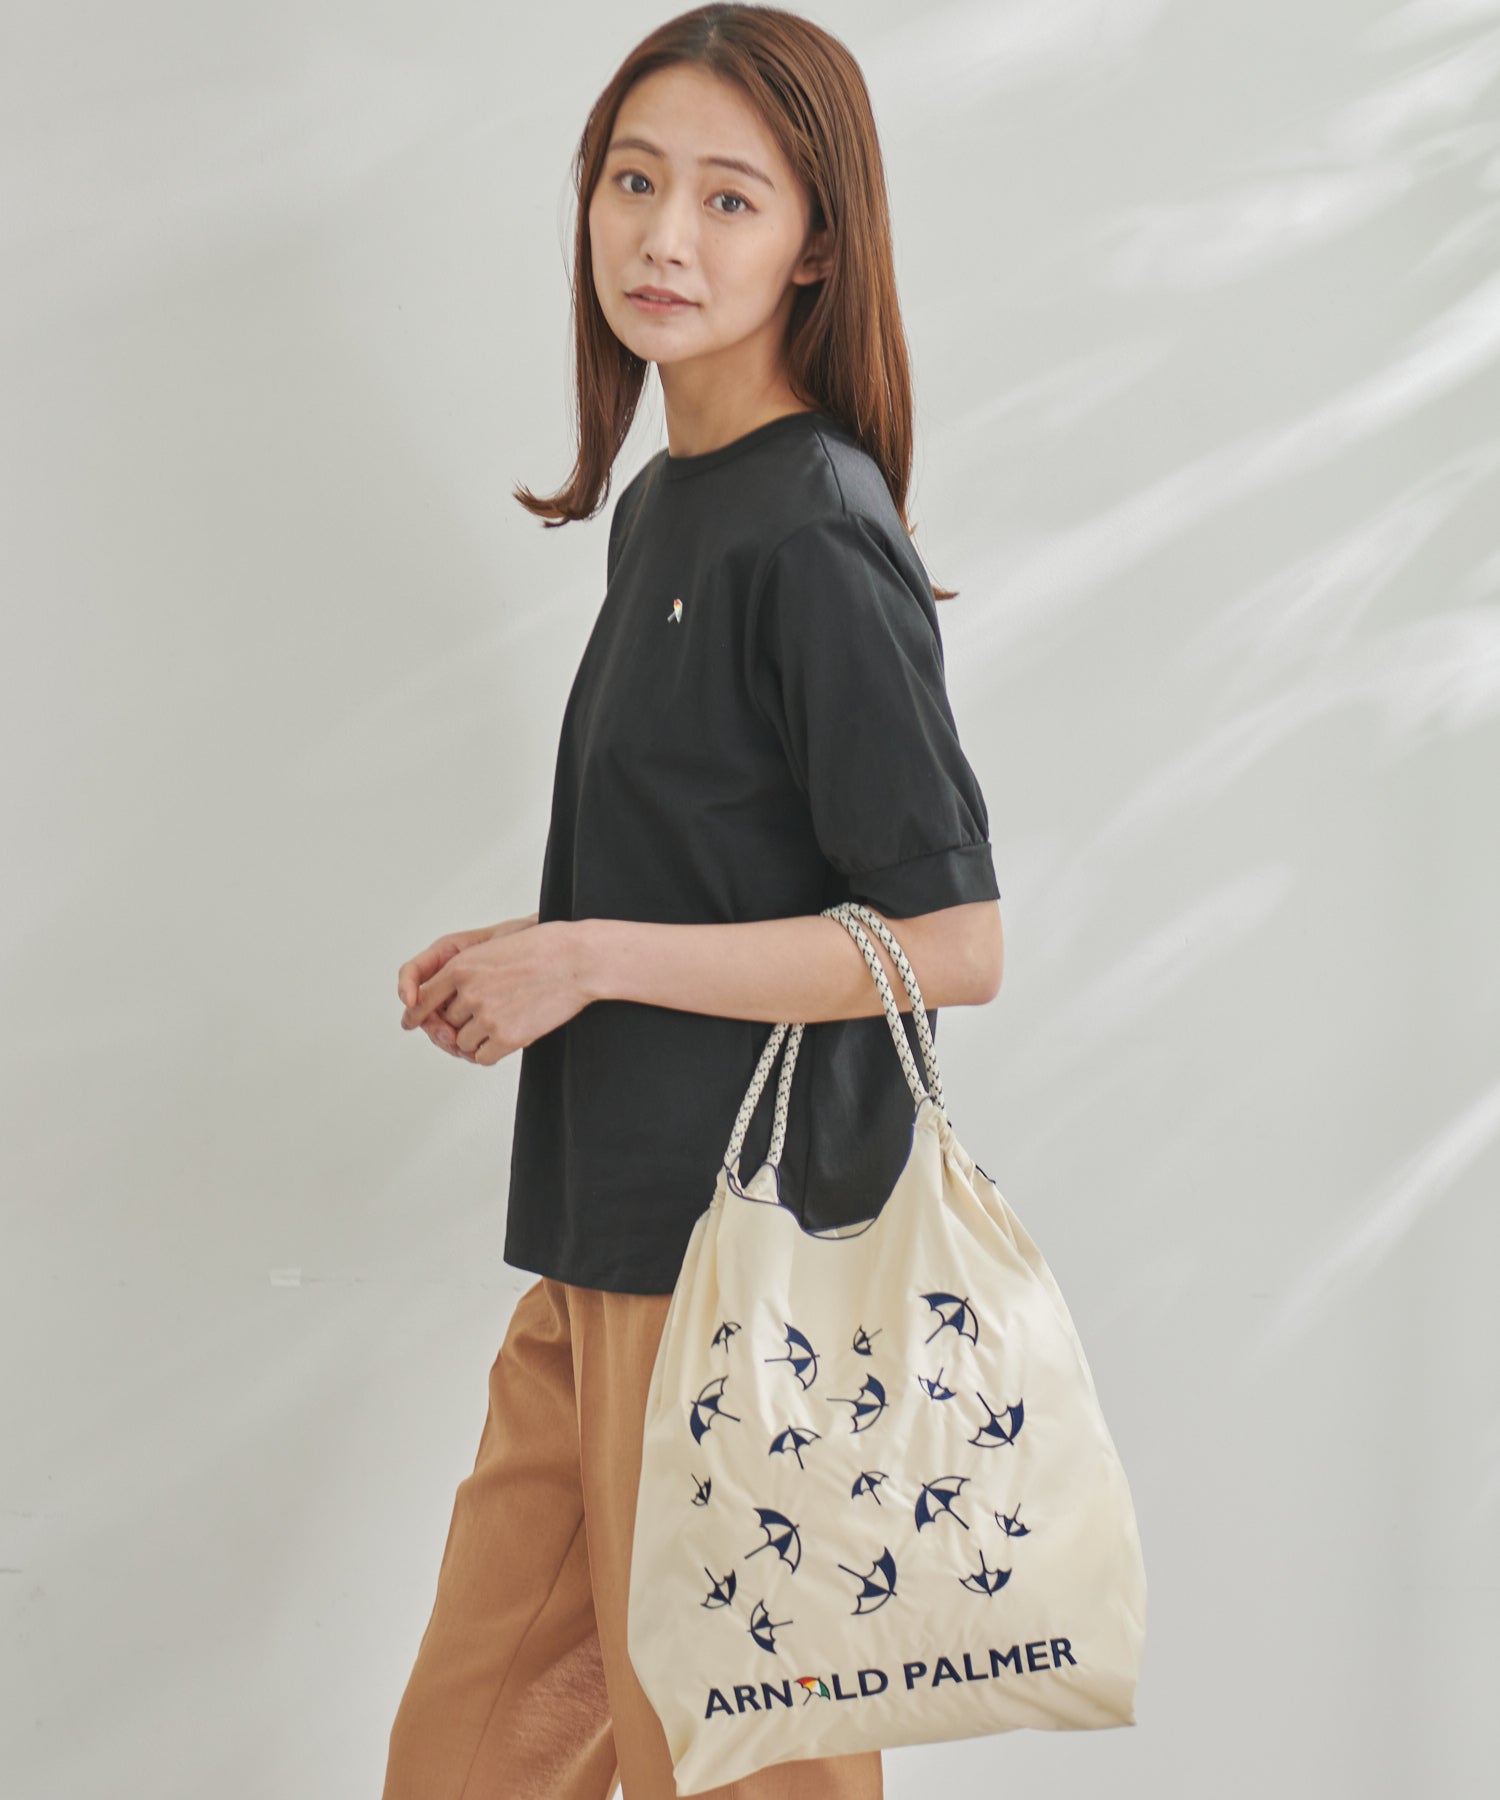 L'Appartement Graphic Tote Bagトートバッグ